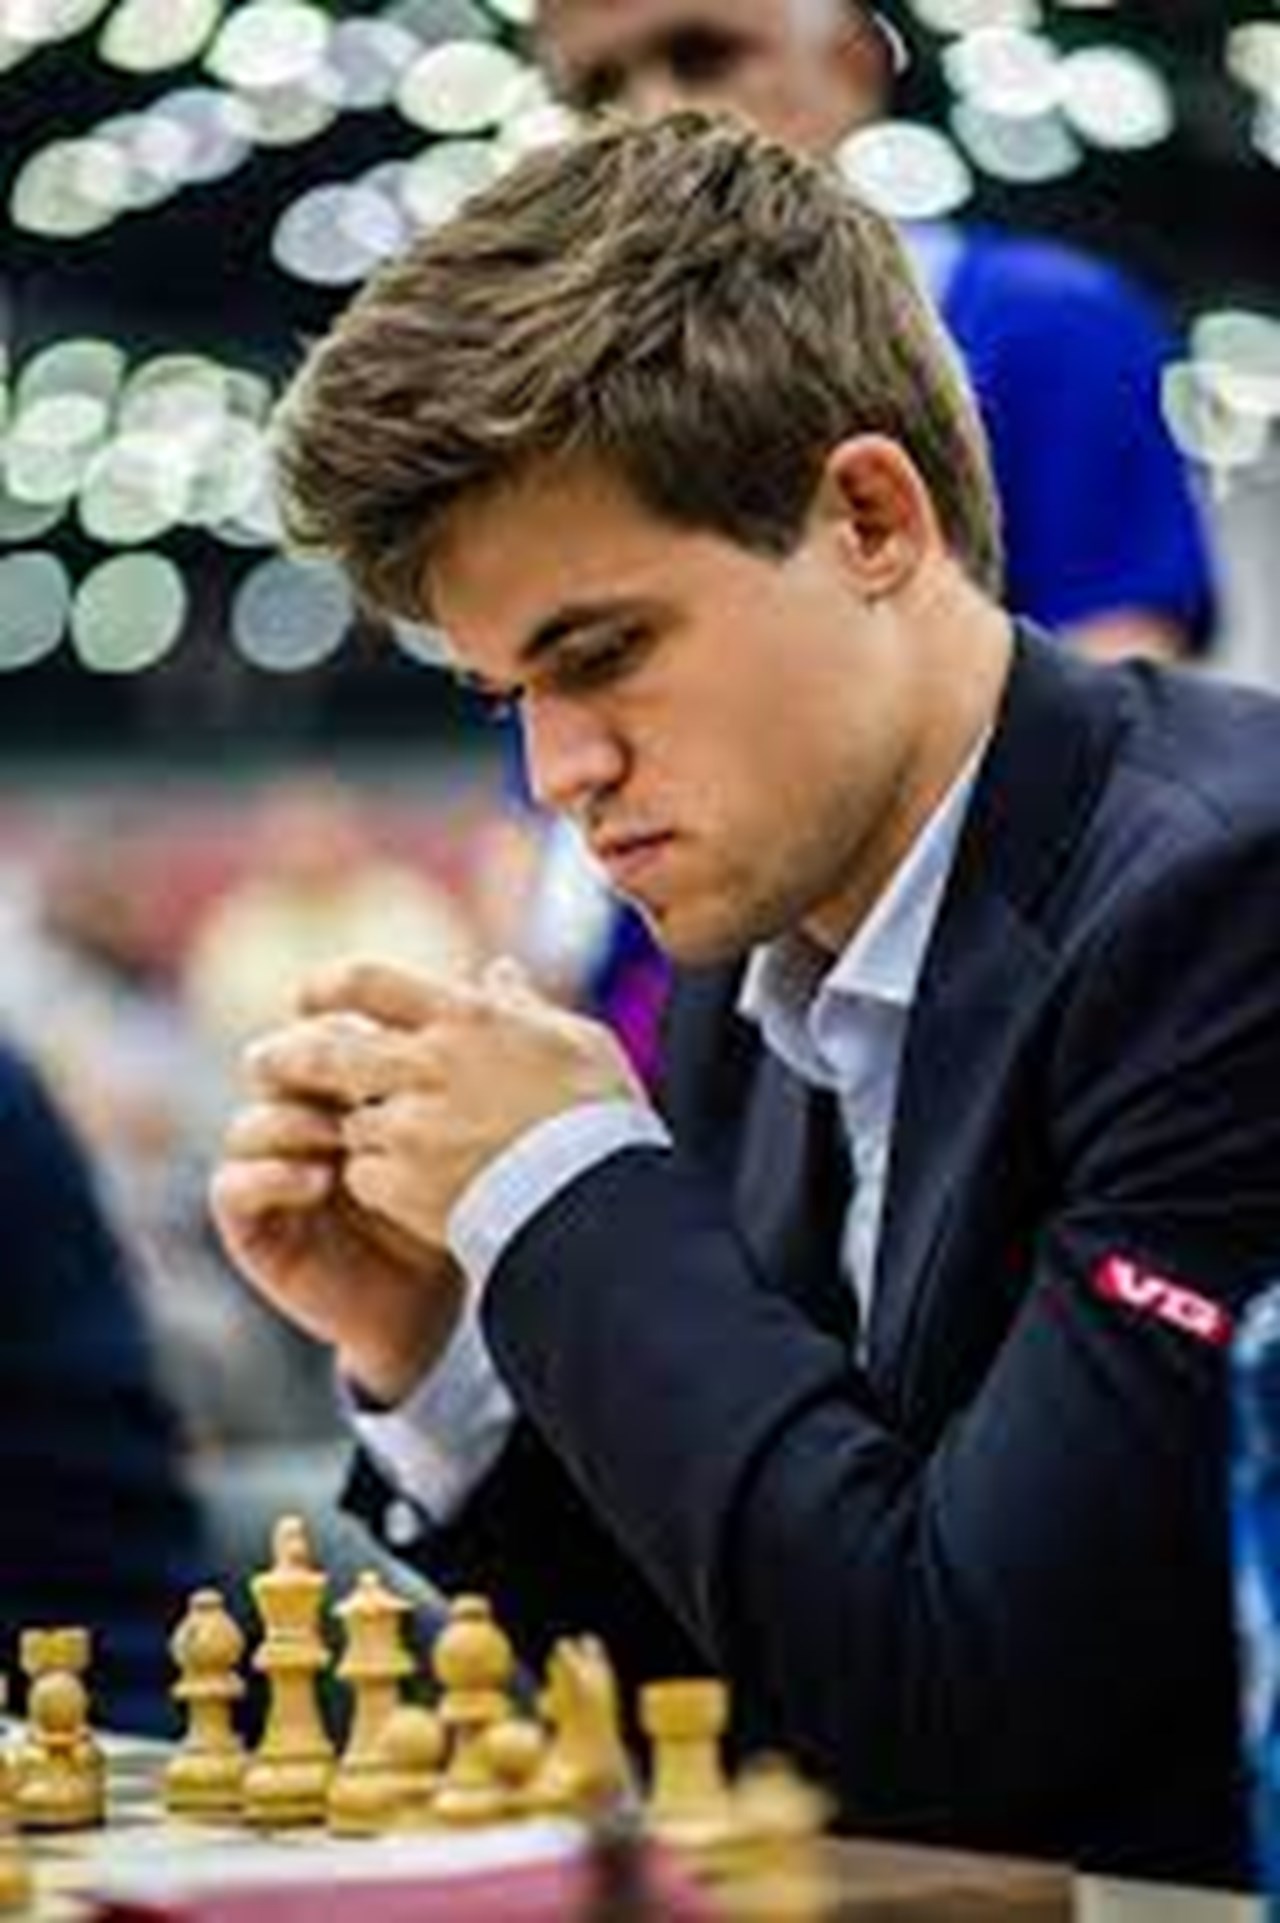 Chess prodigy Hans Niemann suspected of cheating in more than 100